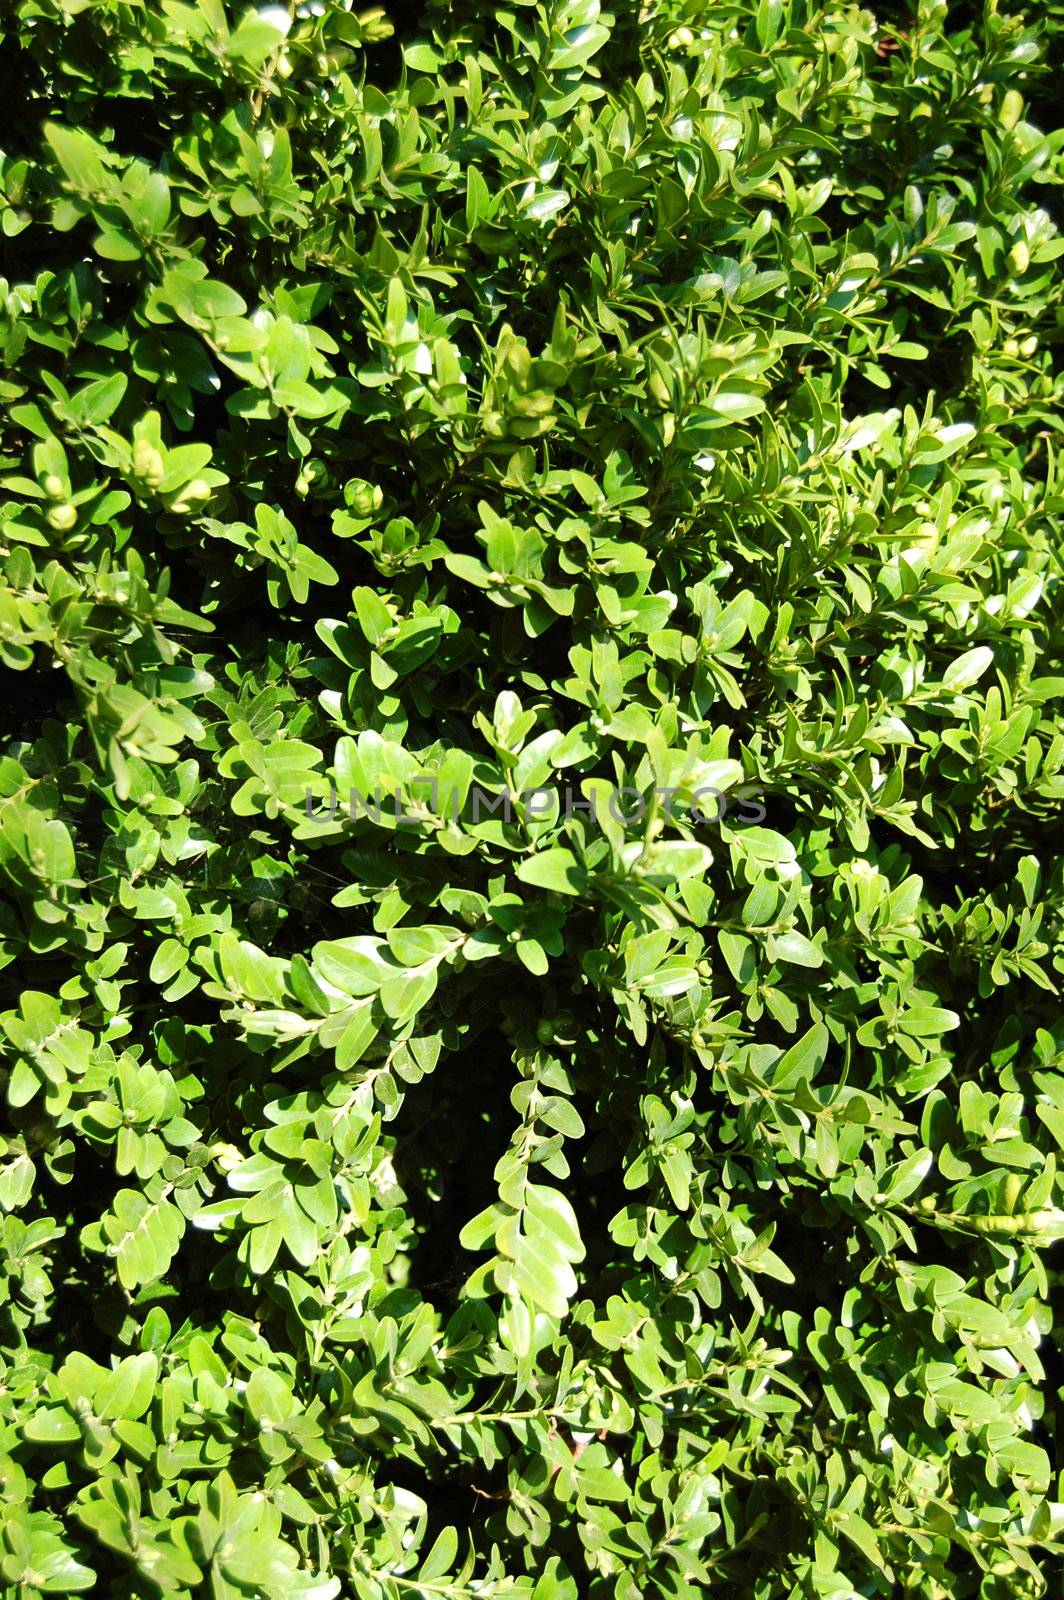 green plant texture or pattern can be used as background